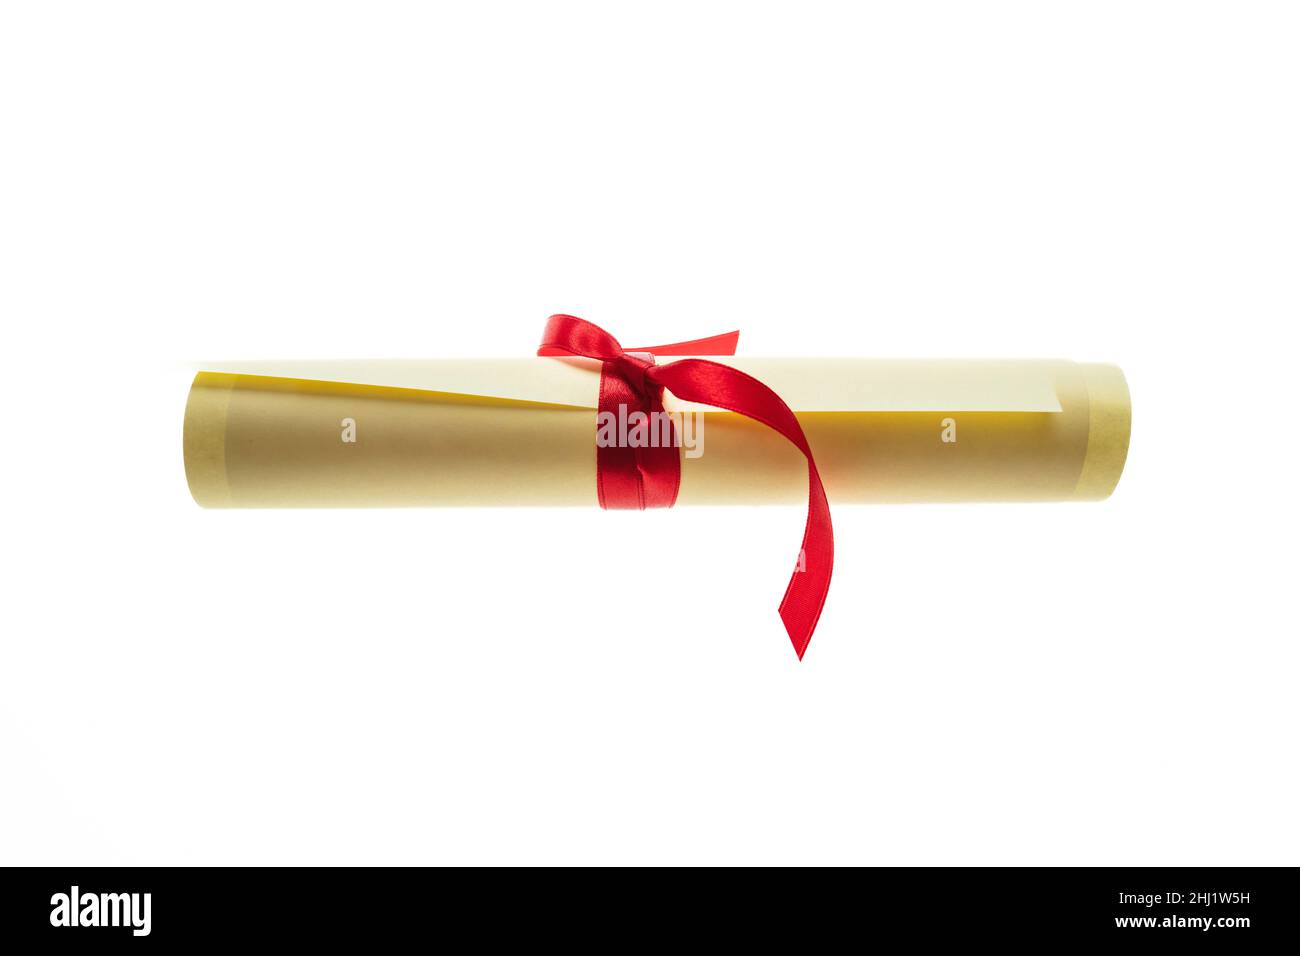 Diploma scroll with red ribbon isolated cutout on white background. College degree paper certificate roll, University graduation, education, studies c Stock Photo